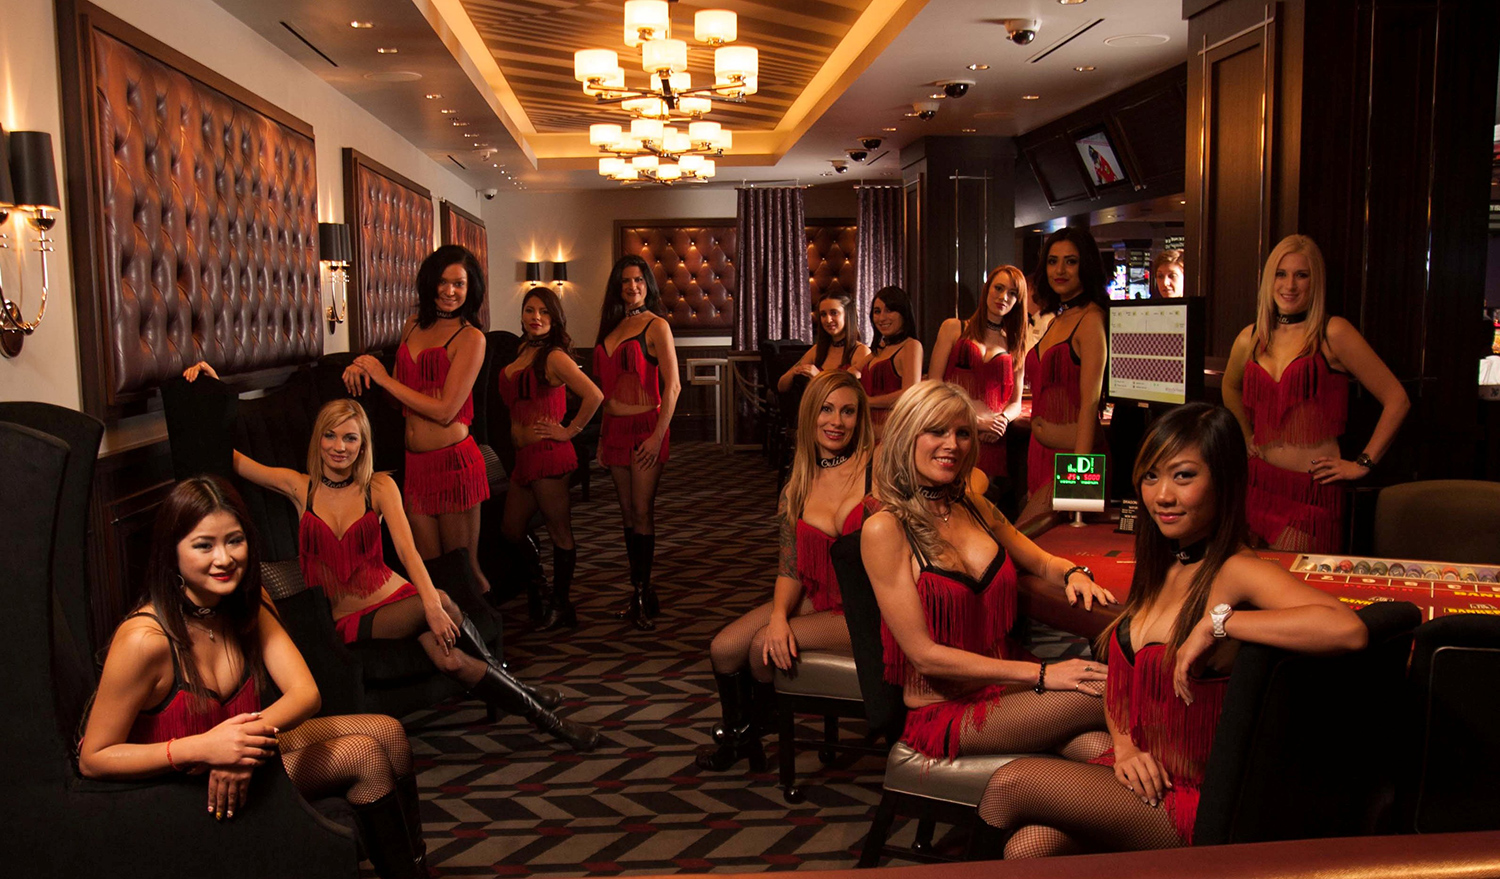 Inside the Scantily-Clad Casino "Party Pits" of Las Vegas.